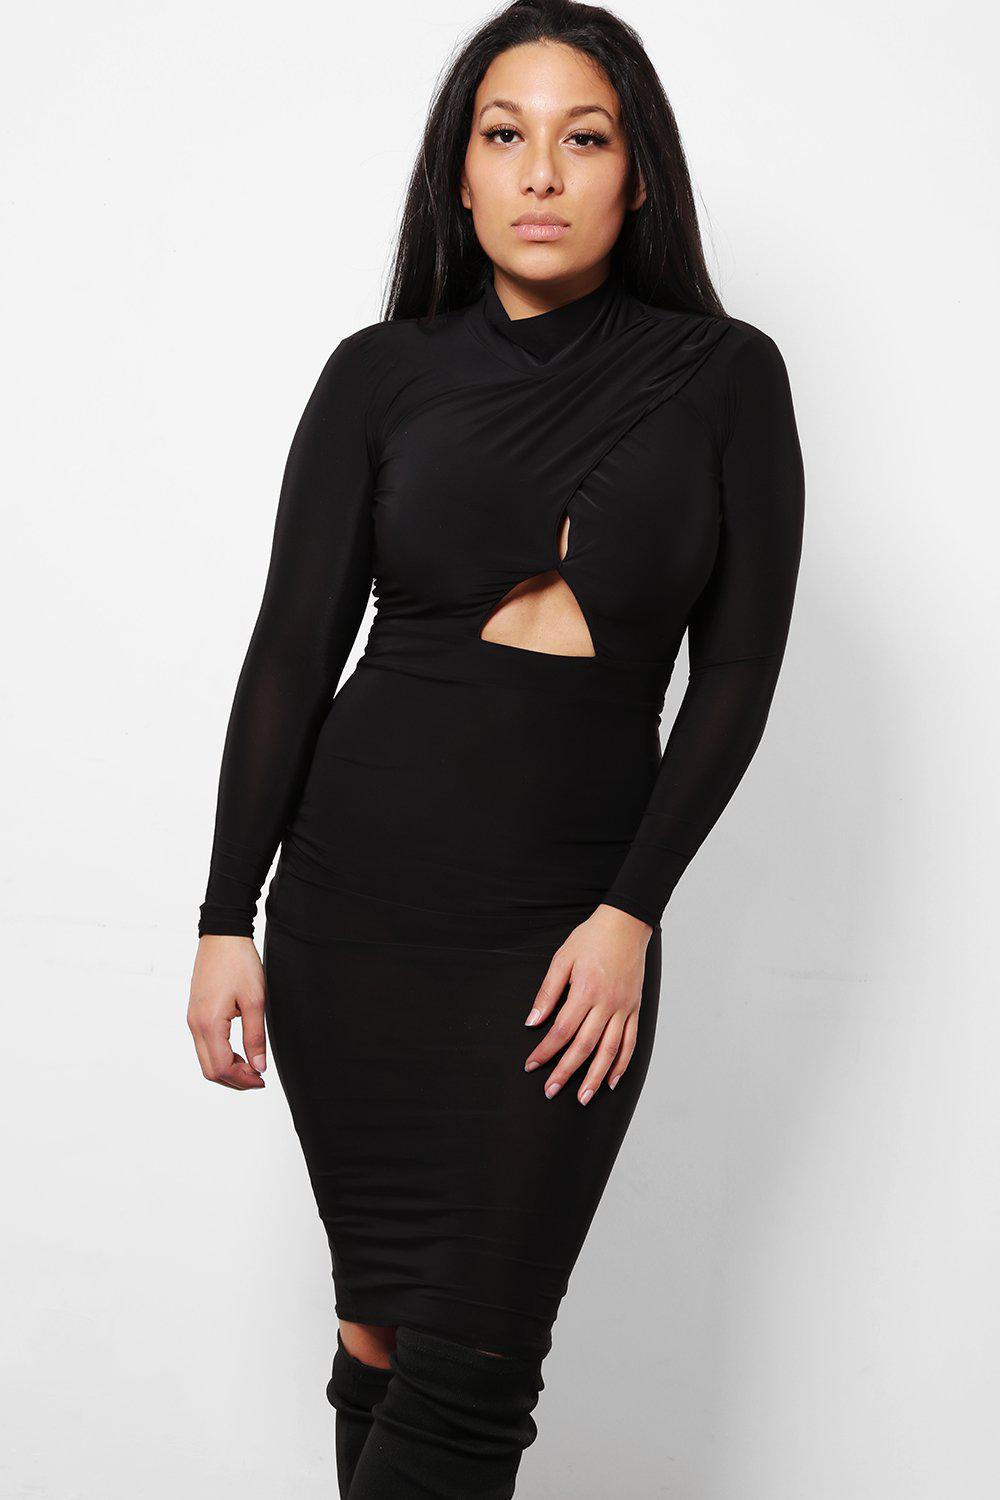 Get High Neck Black Peek A Boo Bodycon Dress For Only £500 Singleprice 